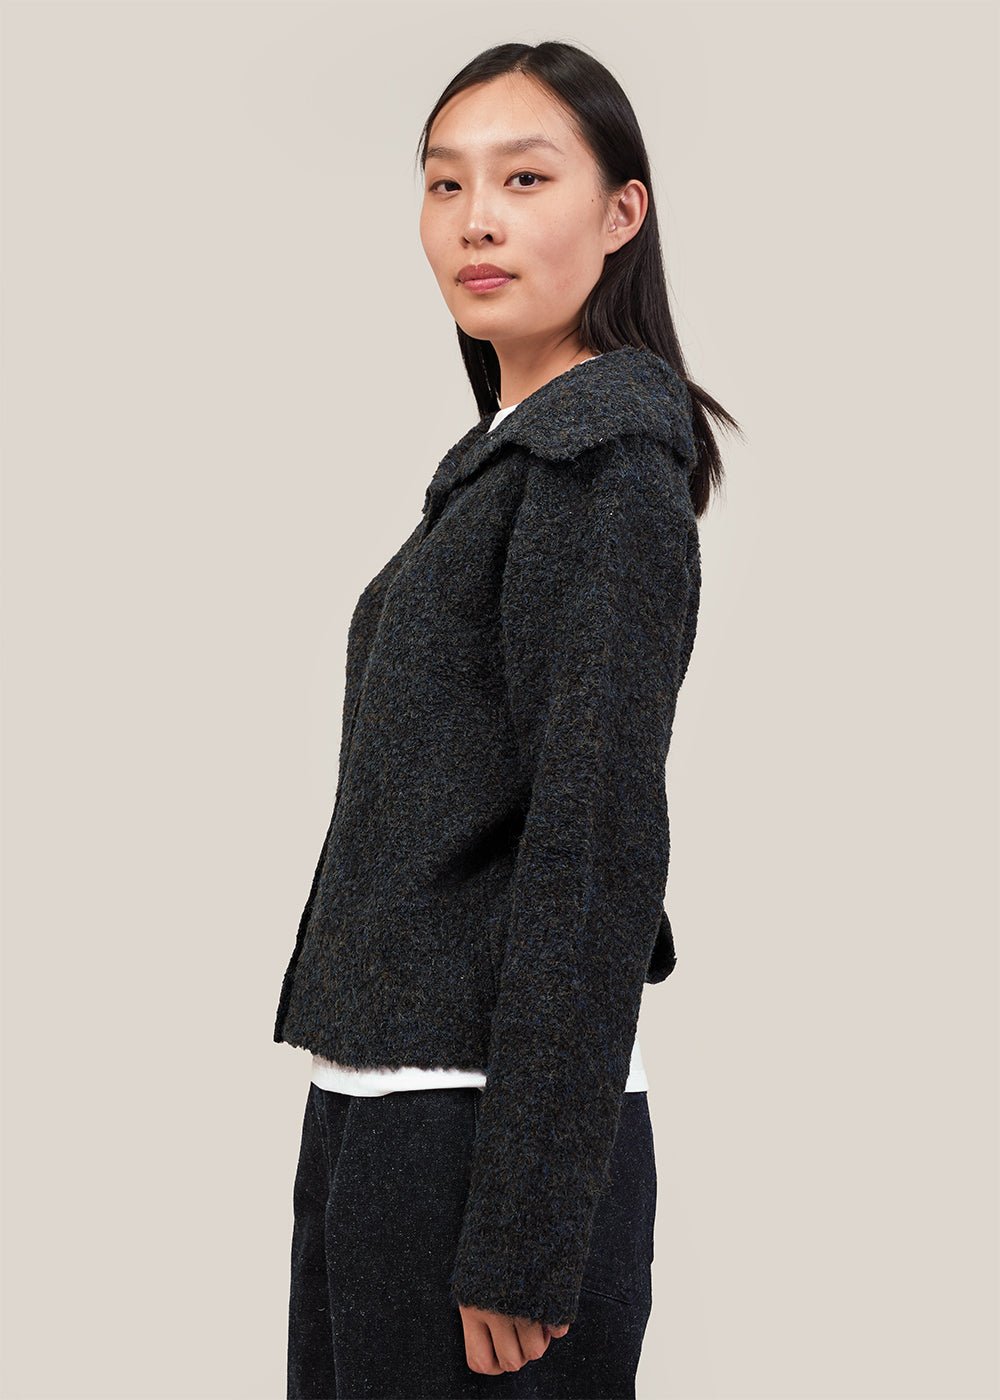 Mijeong Park Navy/Olive Spread Collar Boucle Cardigan - New Classics Studios Sustainable Ethical Fashion Canada